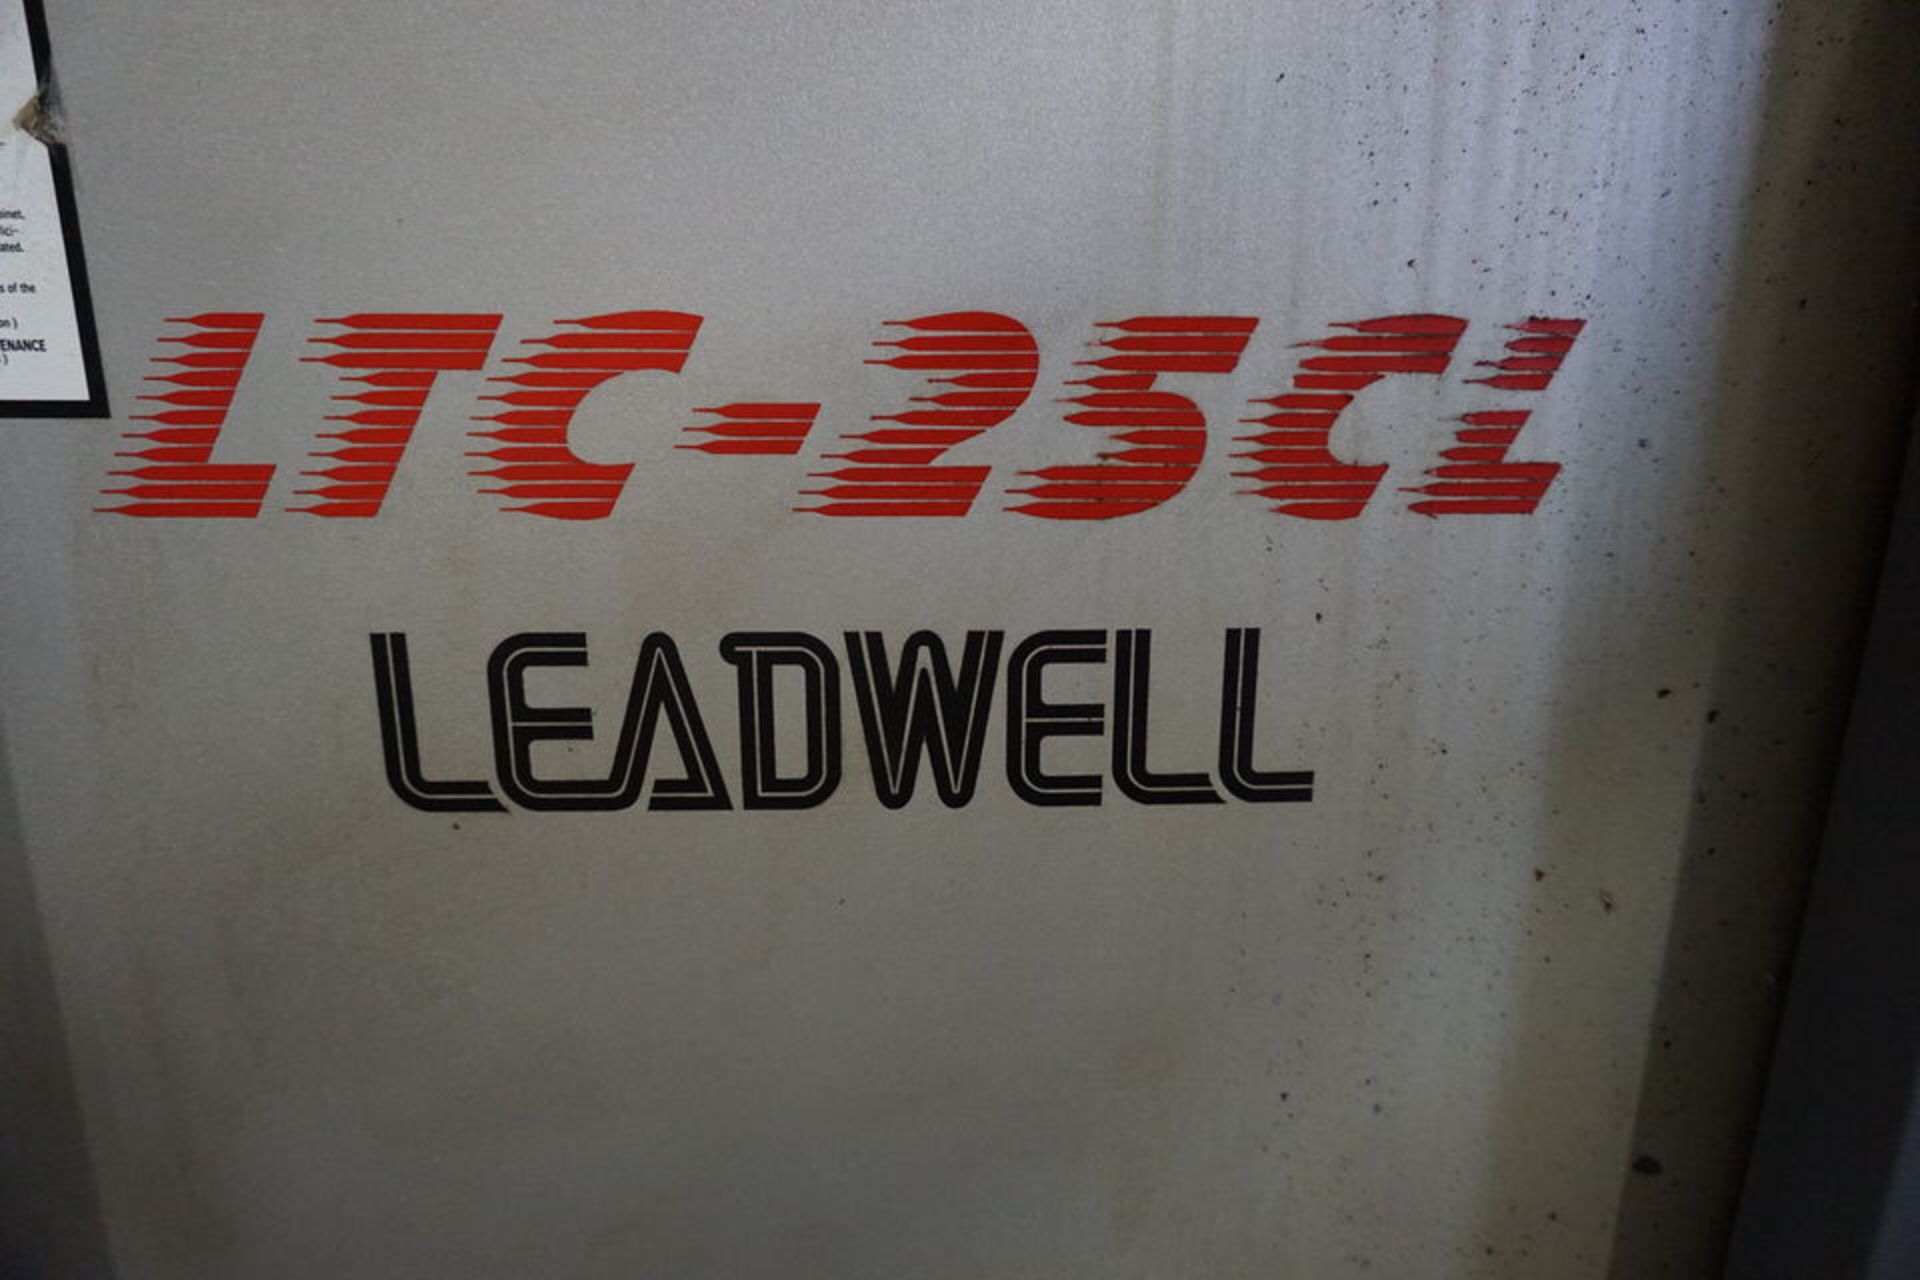 2012 LEADWELL LTC-25CL CNC LATHE, FANUC OI-TD CTRL, 12" 3 JAW CHUCK, 12 POSITION TURRENT, - Image 7 of 17